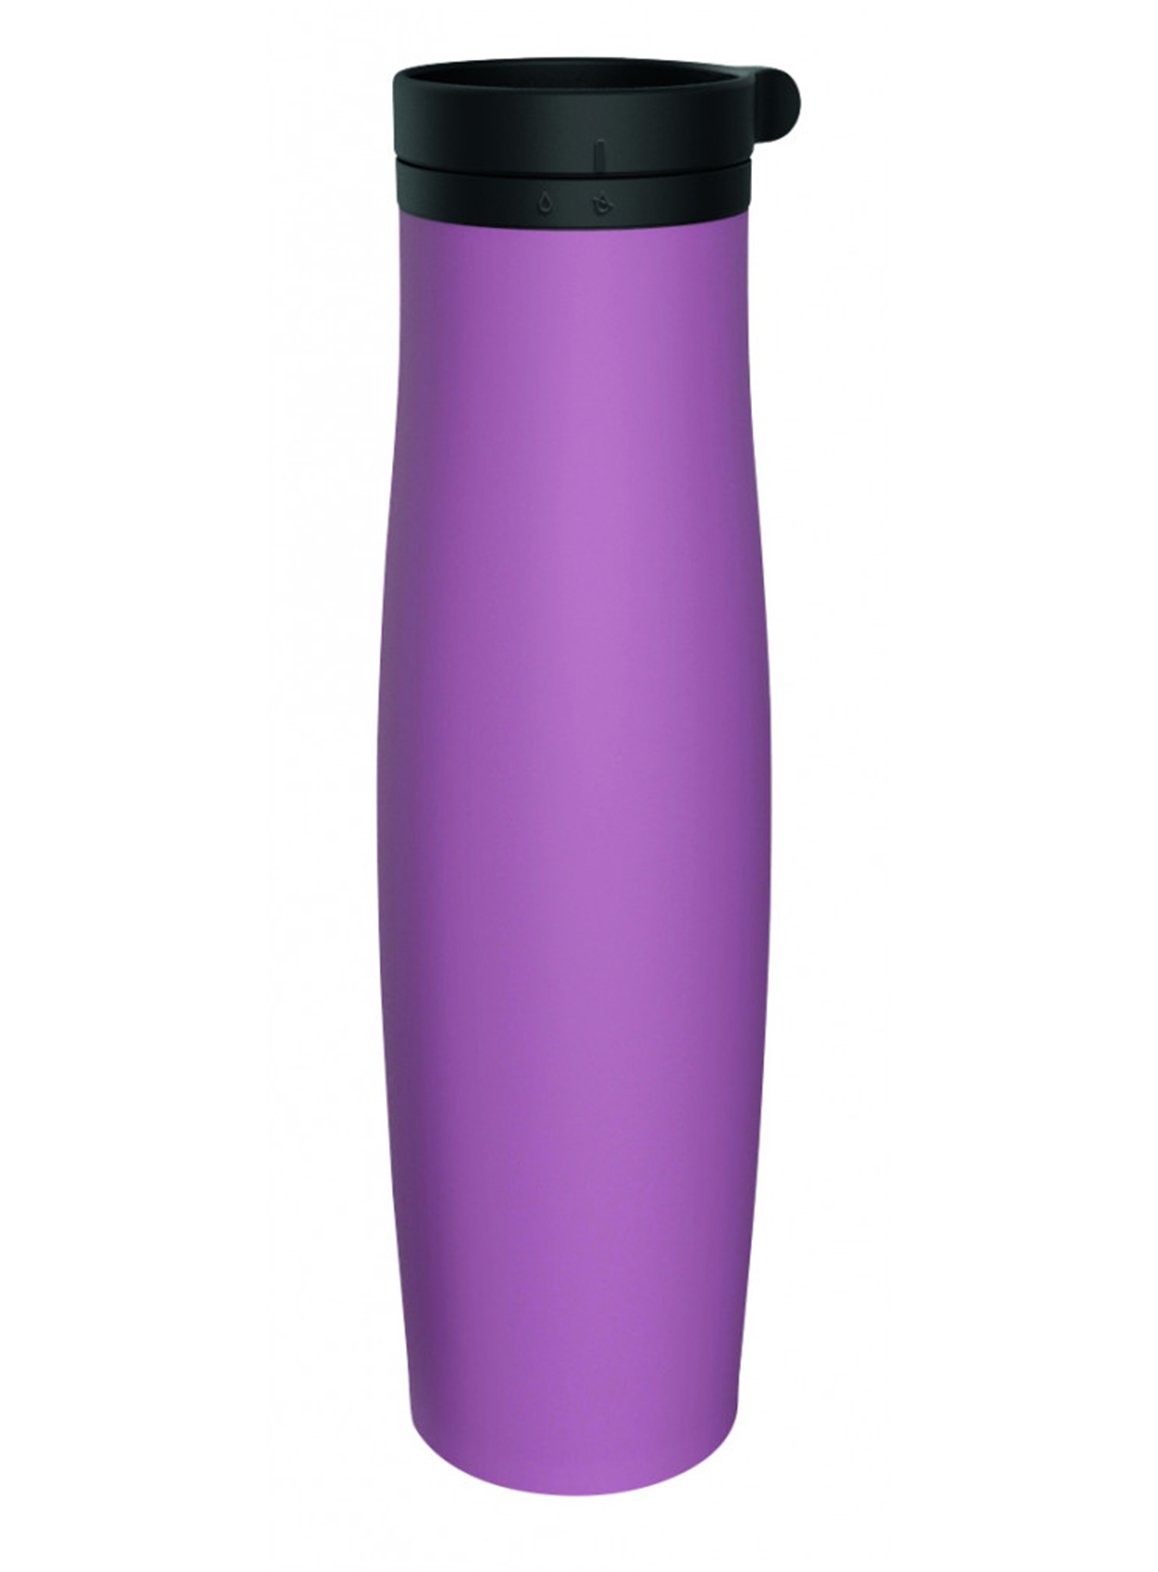 https://cambriabike.com/cdn/shop/products/Camelbak_Beck_20oz_Bottle_Insulated_Stainless_Steel_-_2019_Lilac_6c5f6aee-f091-423e-a2a5-6fc01c22e812.jpg?v=1620899622&width=2048